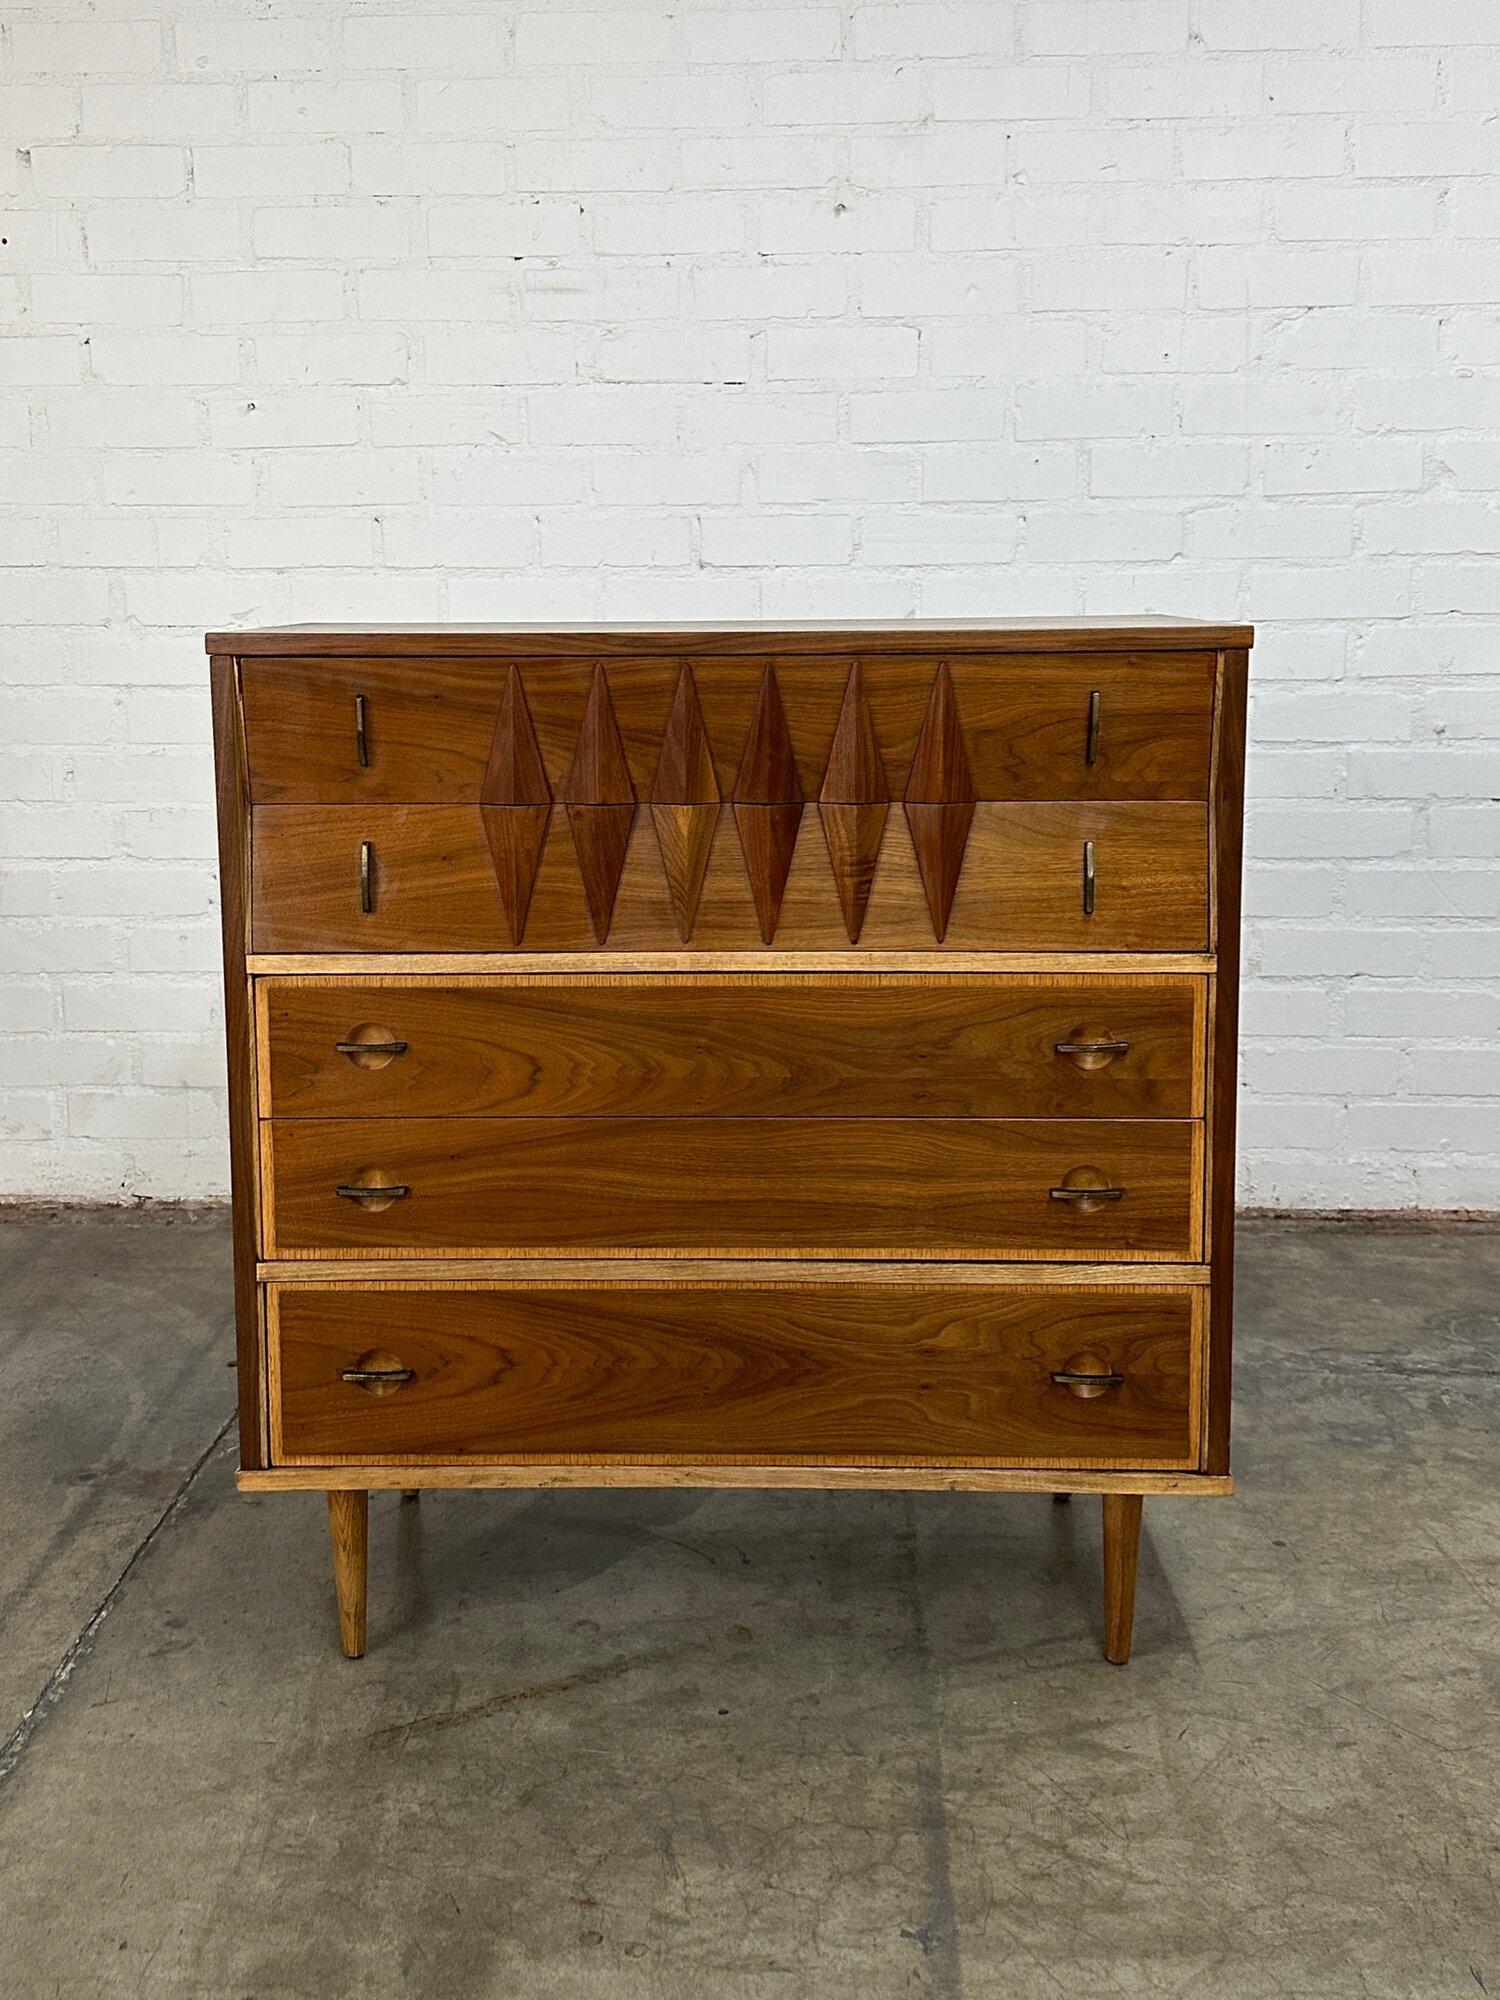 W40 D18 H43

Fully restored walnut highboy dresser. Item features very nice sculptural features and original hardware. Item is structurally sound and full functional.